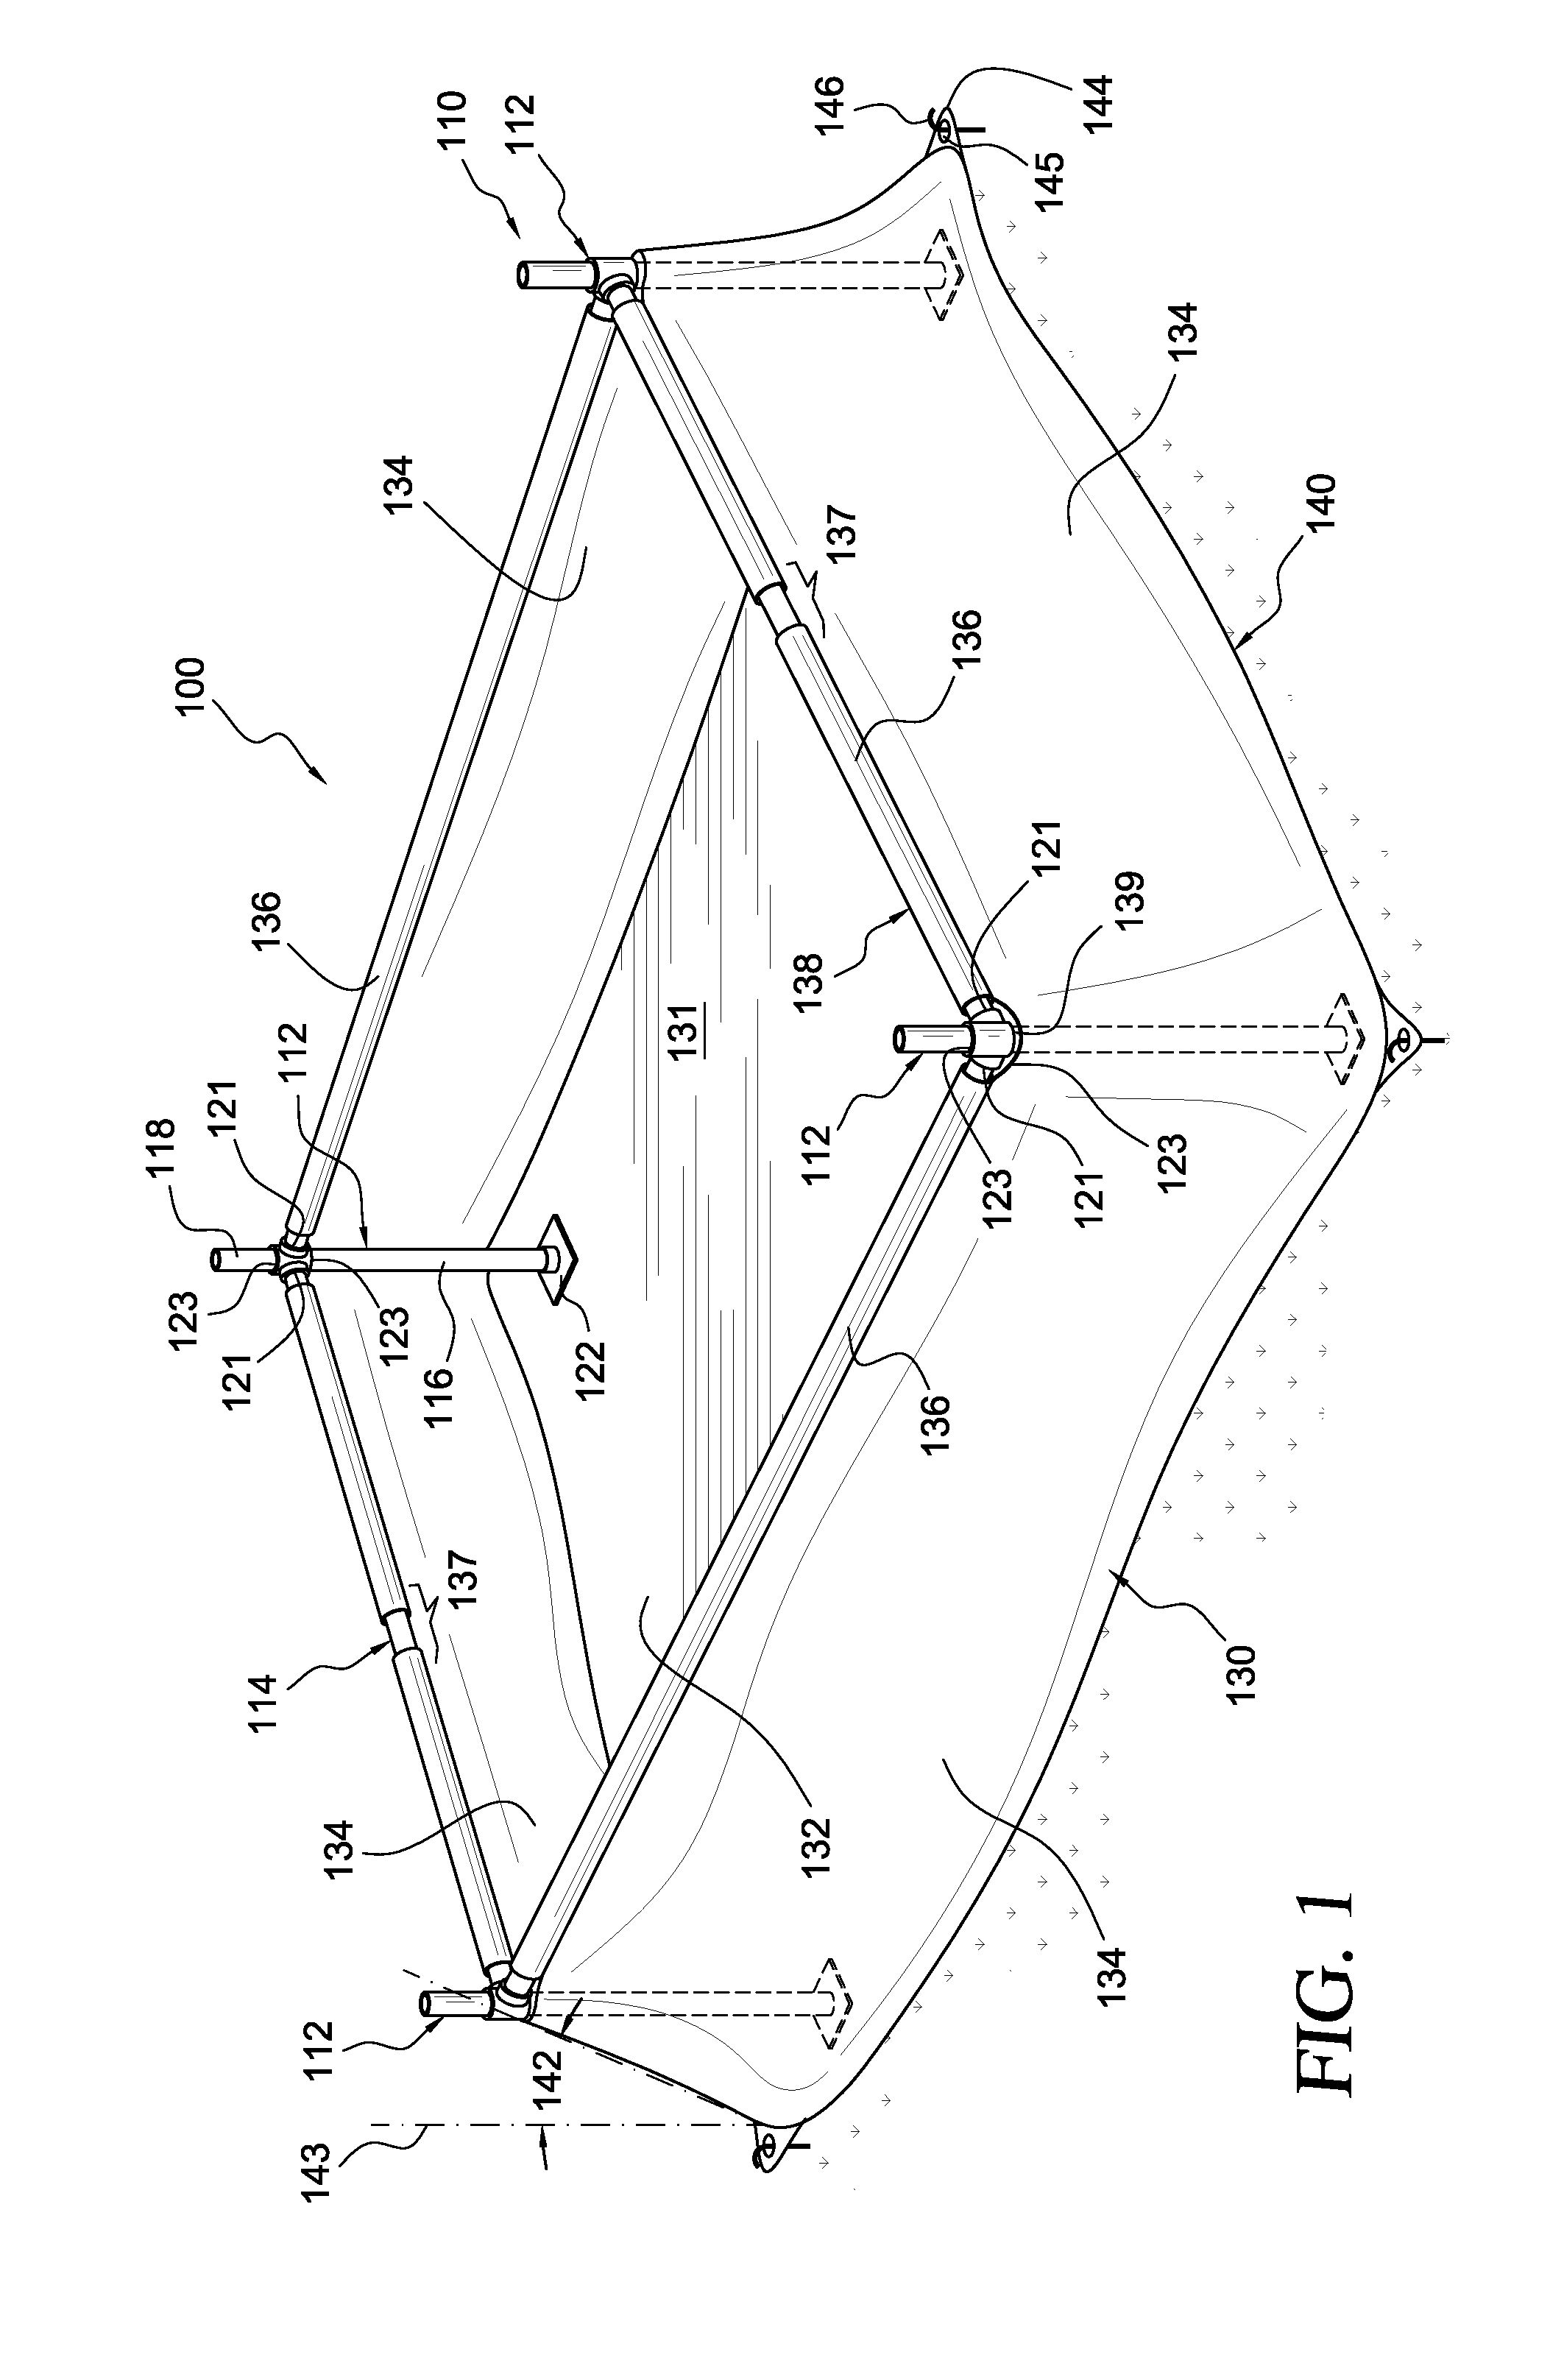 Portable Containment Device and Method